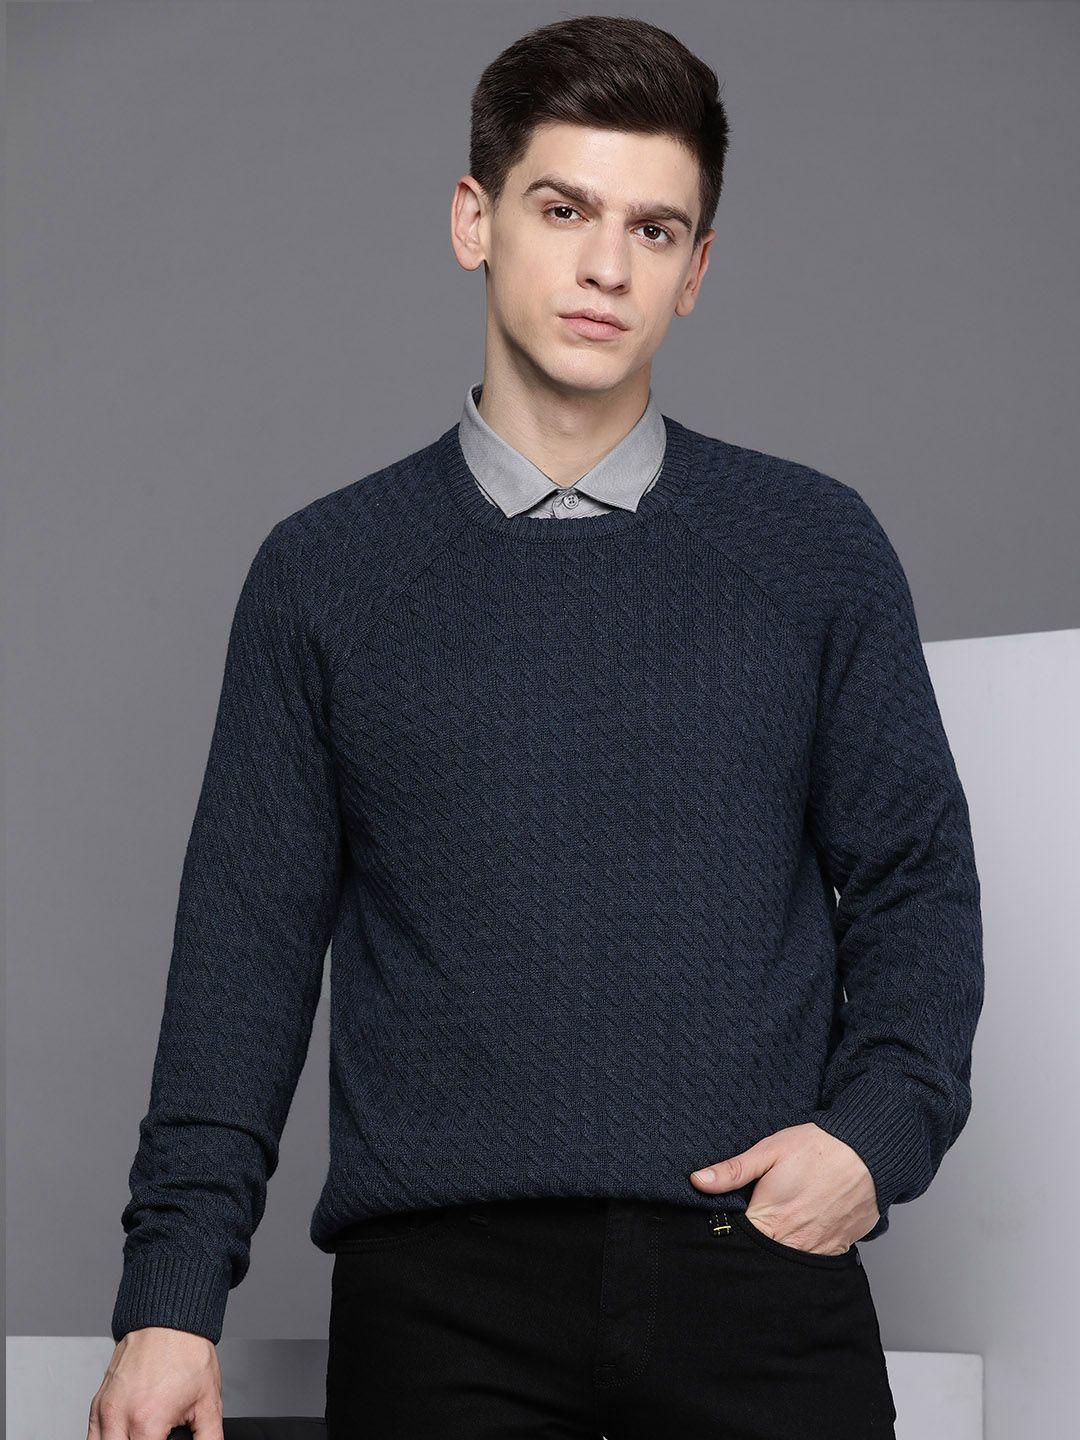 kenneth-cole-men-navy-blue-self-design-cable-knit-pullover-sweater